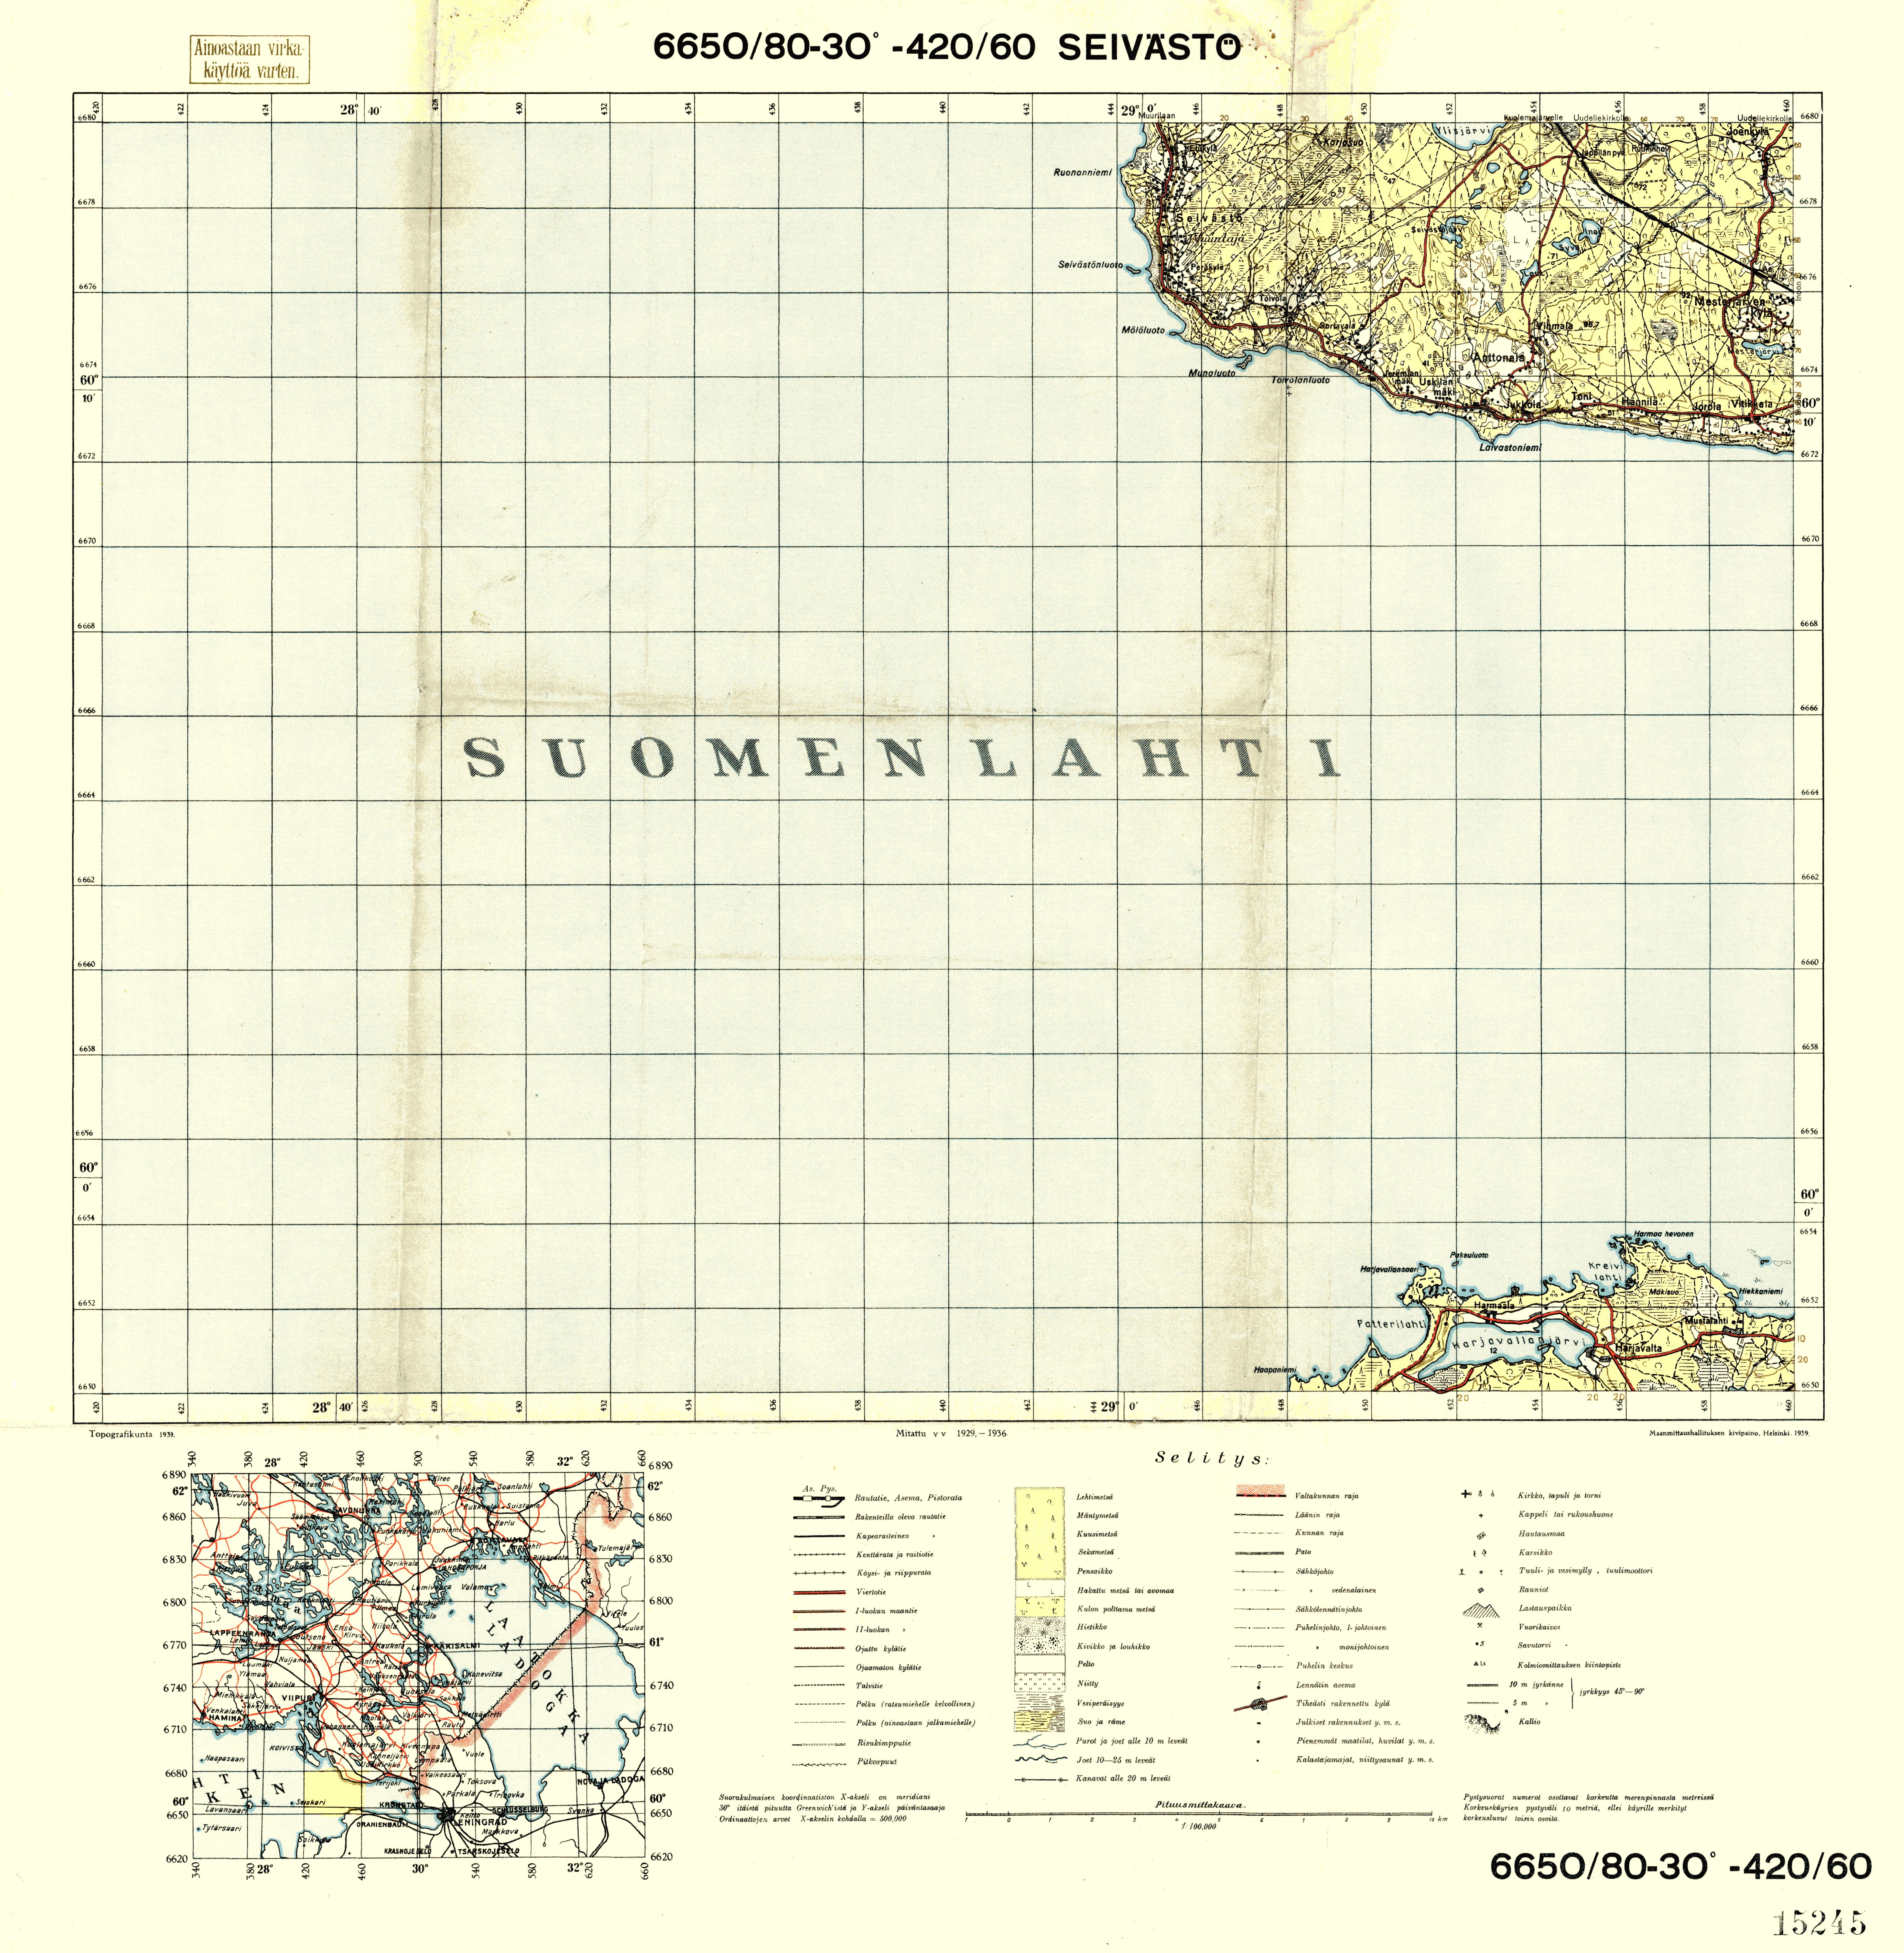 Ozerki. Seivästö. Topografikartta 4012. Topographic map from 1939. Use the zooming tool to explore in higher level of detail. Obtain as a quality print or high resolution image